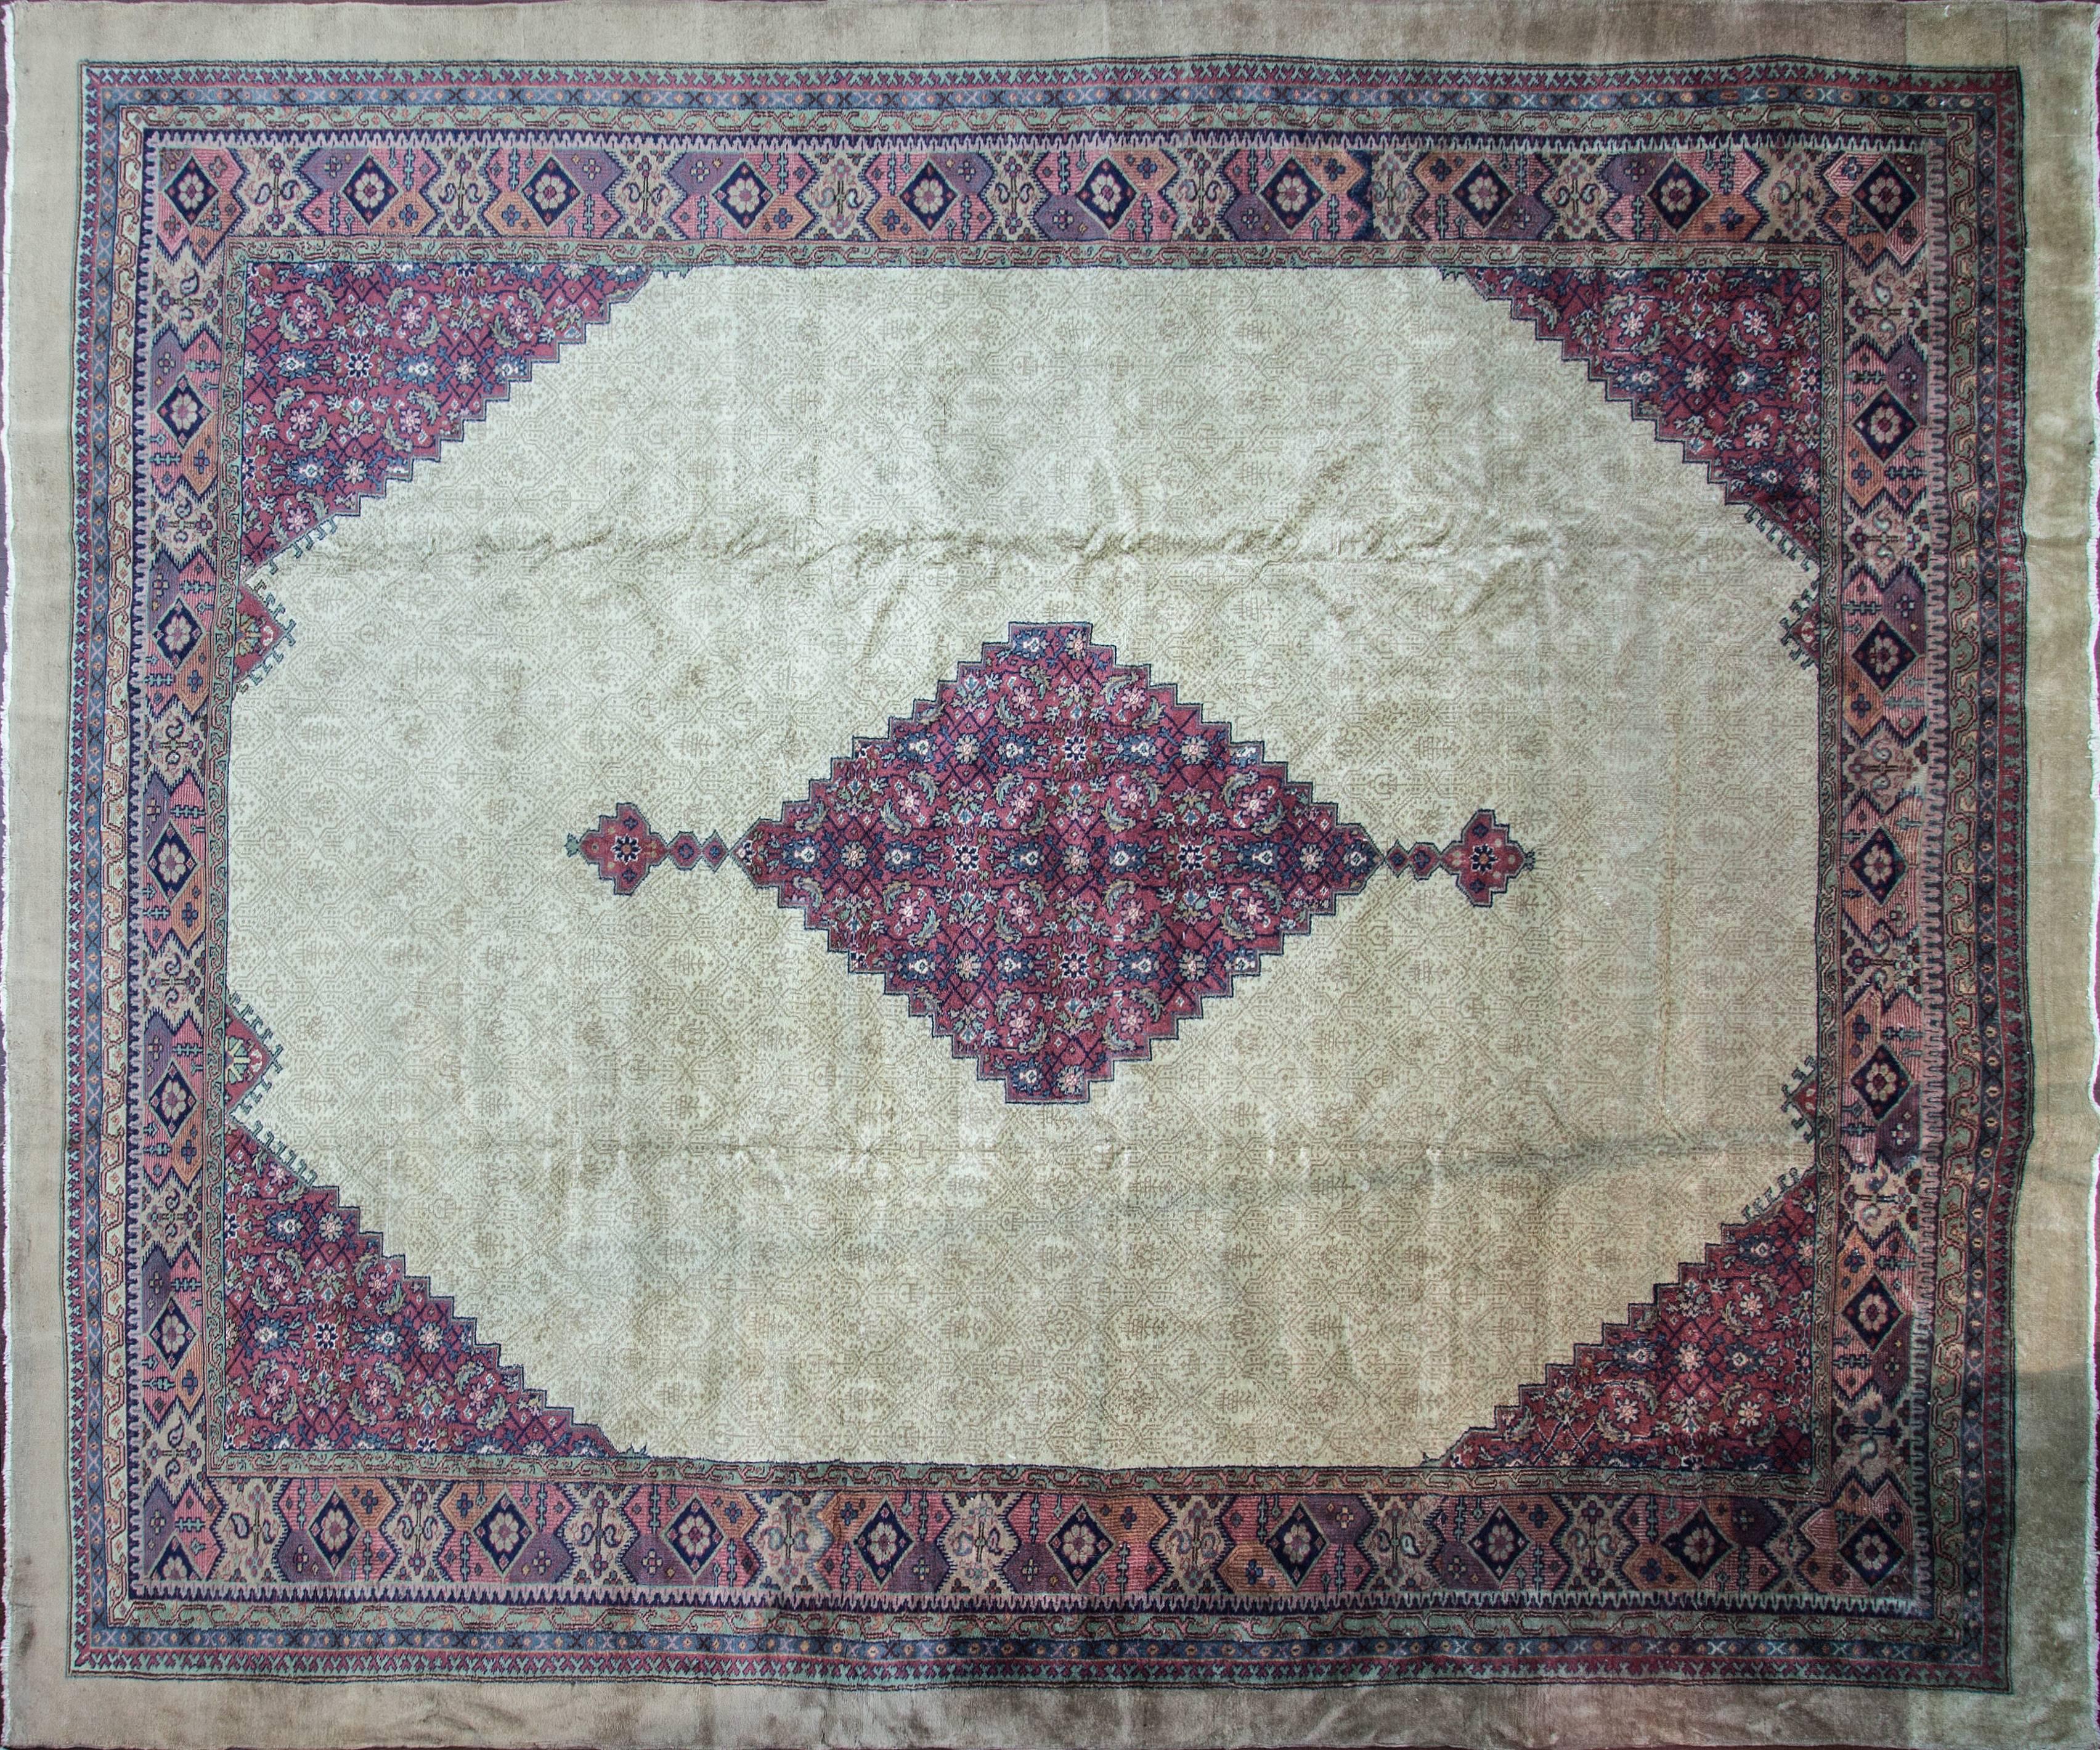 Antique Turkish Serab carpet. Measure: 12' x 14'.
Serab rugs are known mostly for their fine long rugs or runners and occasionally large room-sized rugs are also found with a characteristic camel ground and lozenge-shaped medallions, camel-colored